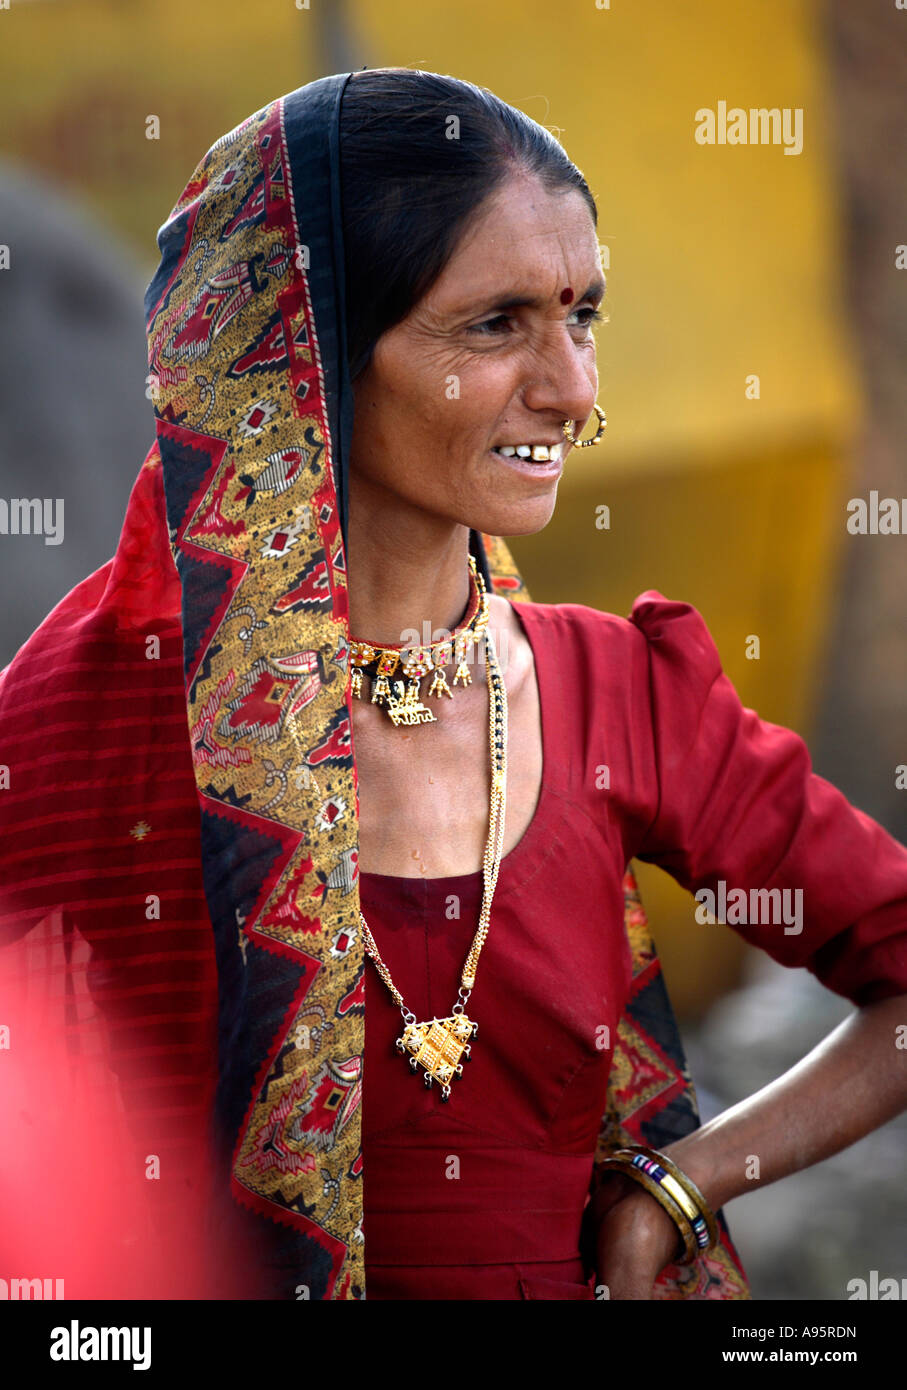 Tribal Indian woman from Kutch district at bus-stand, Bhuj, Gujarat, India Stock Photo